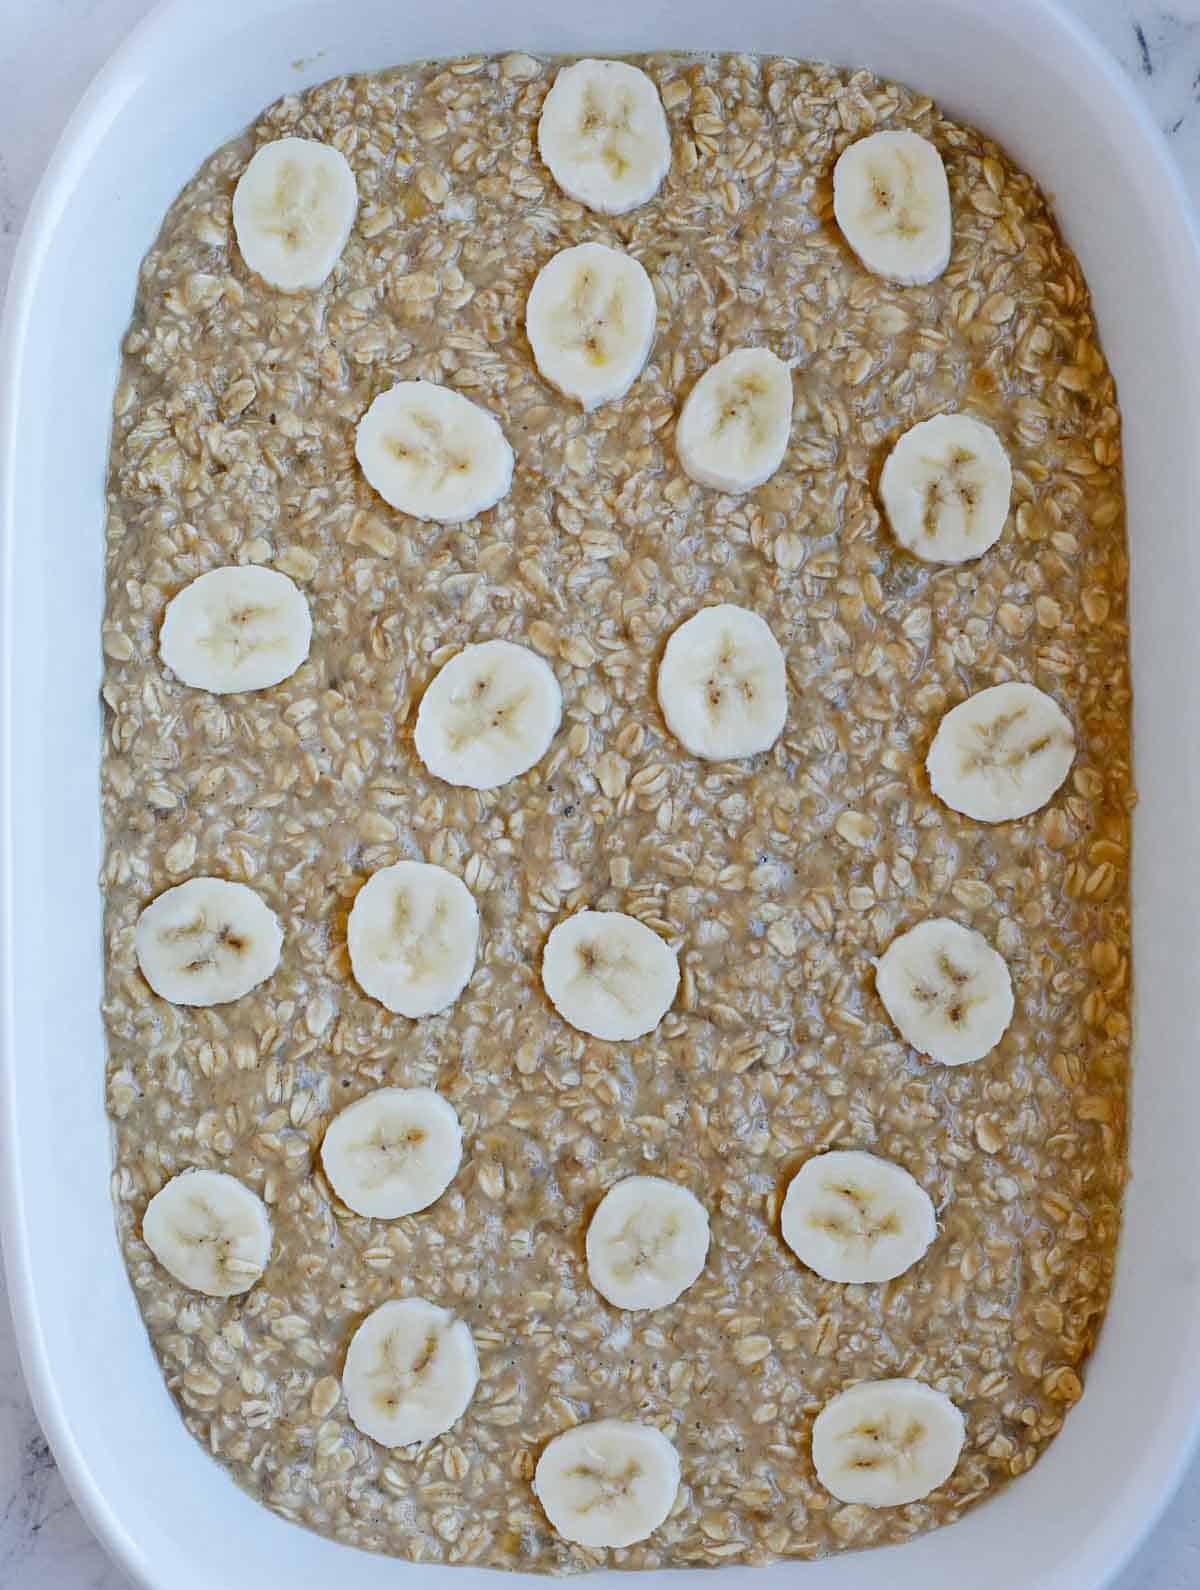 Place bananas on top of the Baked Peanut Butter Oatmeal.